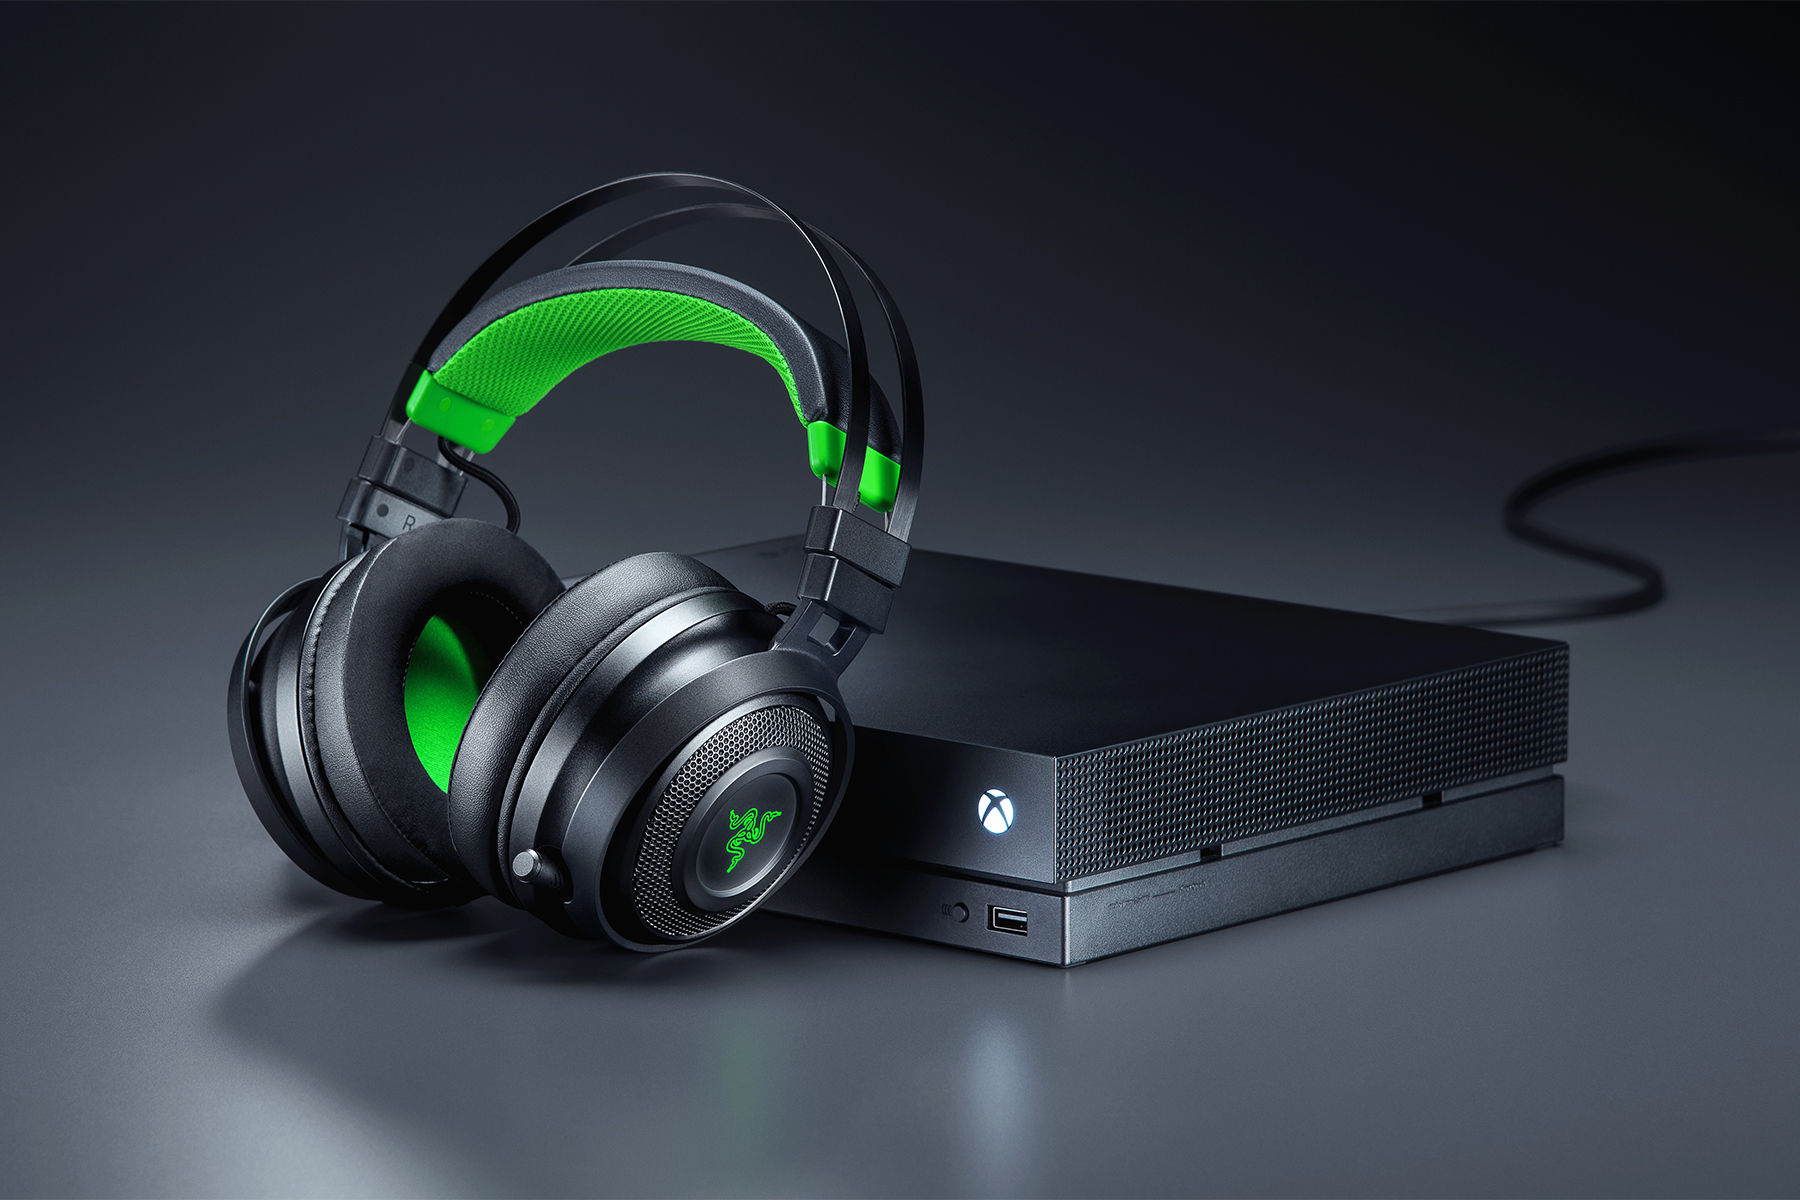 Razer Launches Nari Ultimate Headsets For Xbox One Exclusively